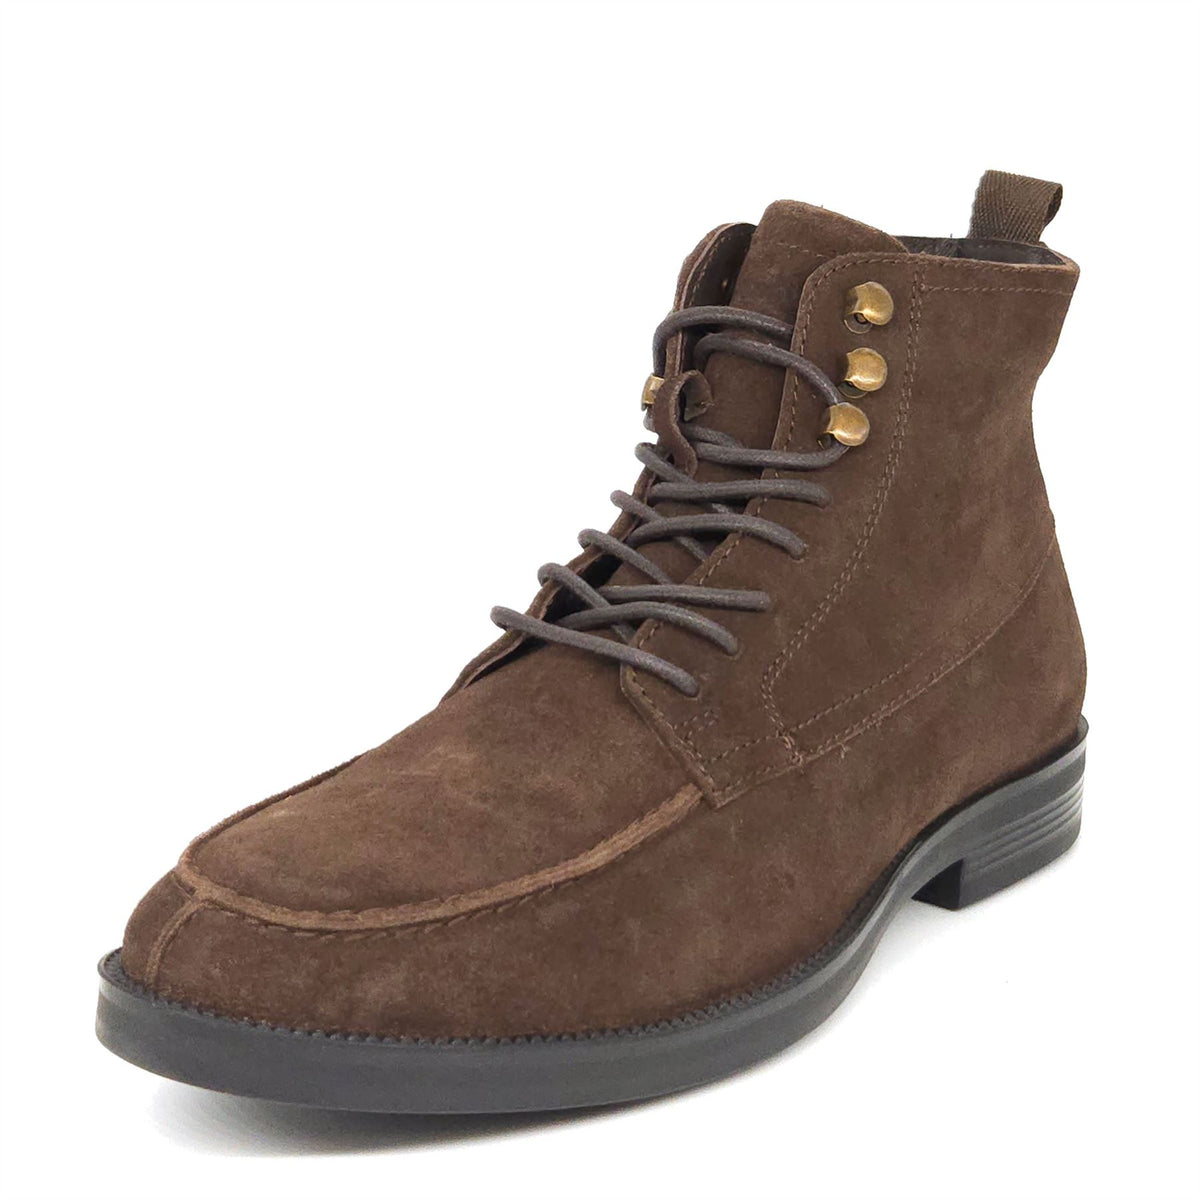 HX London Ealing Suede Lace Up Leather Boots